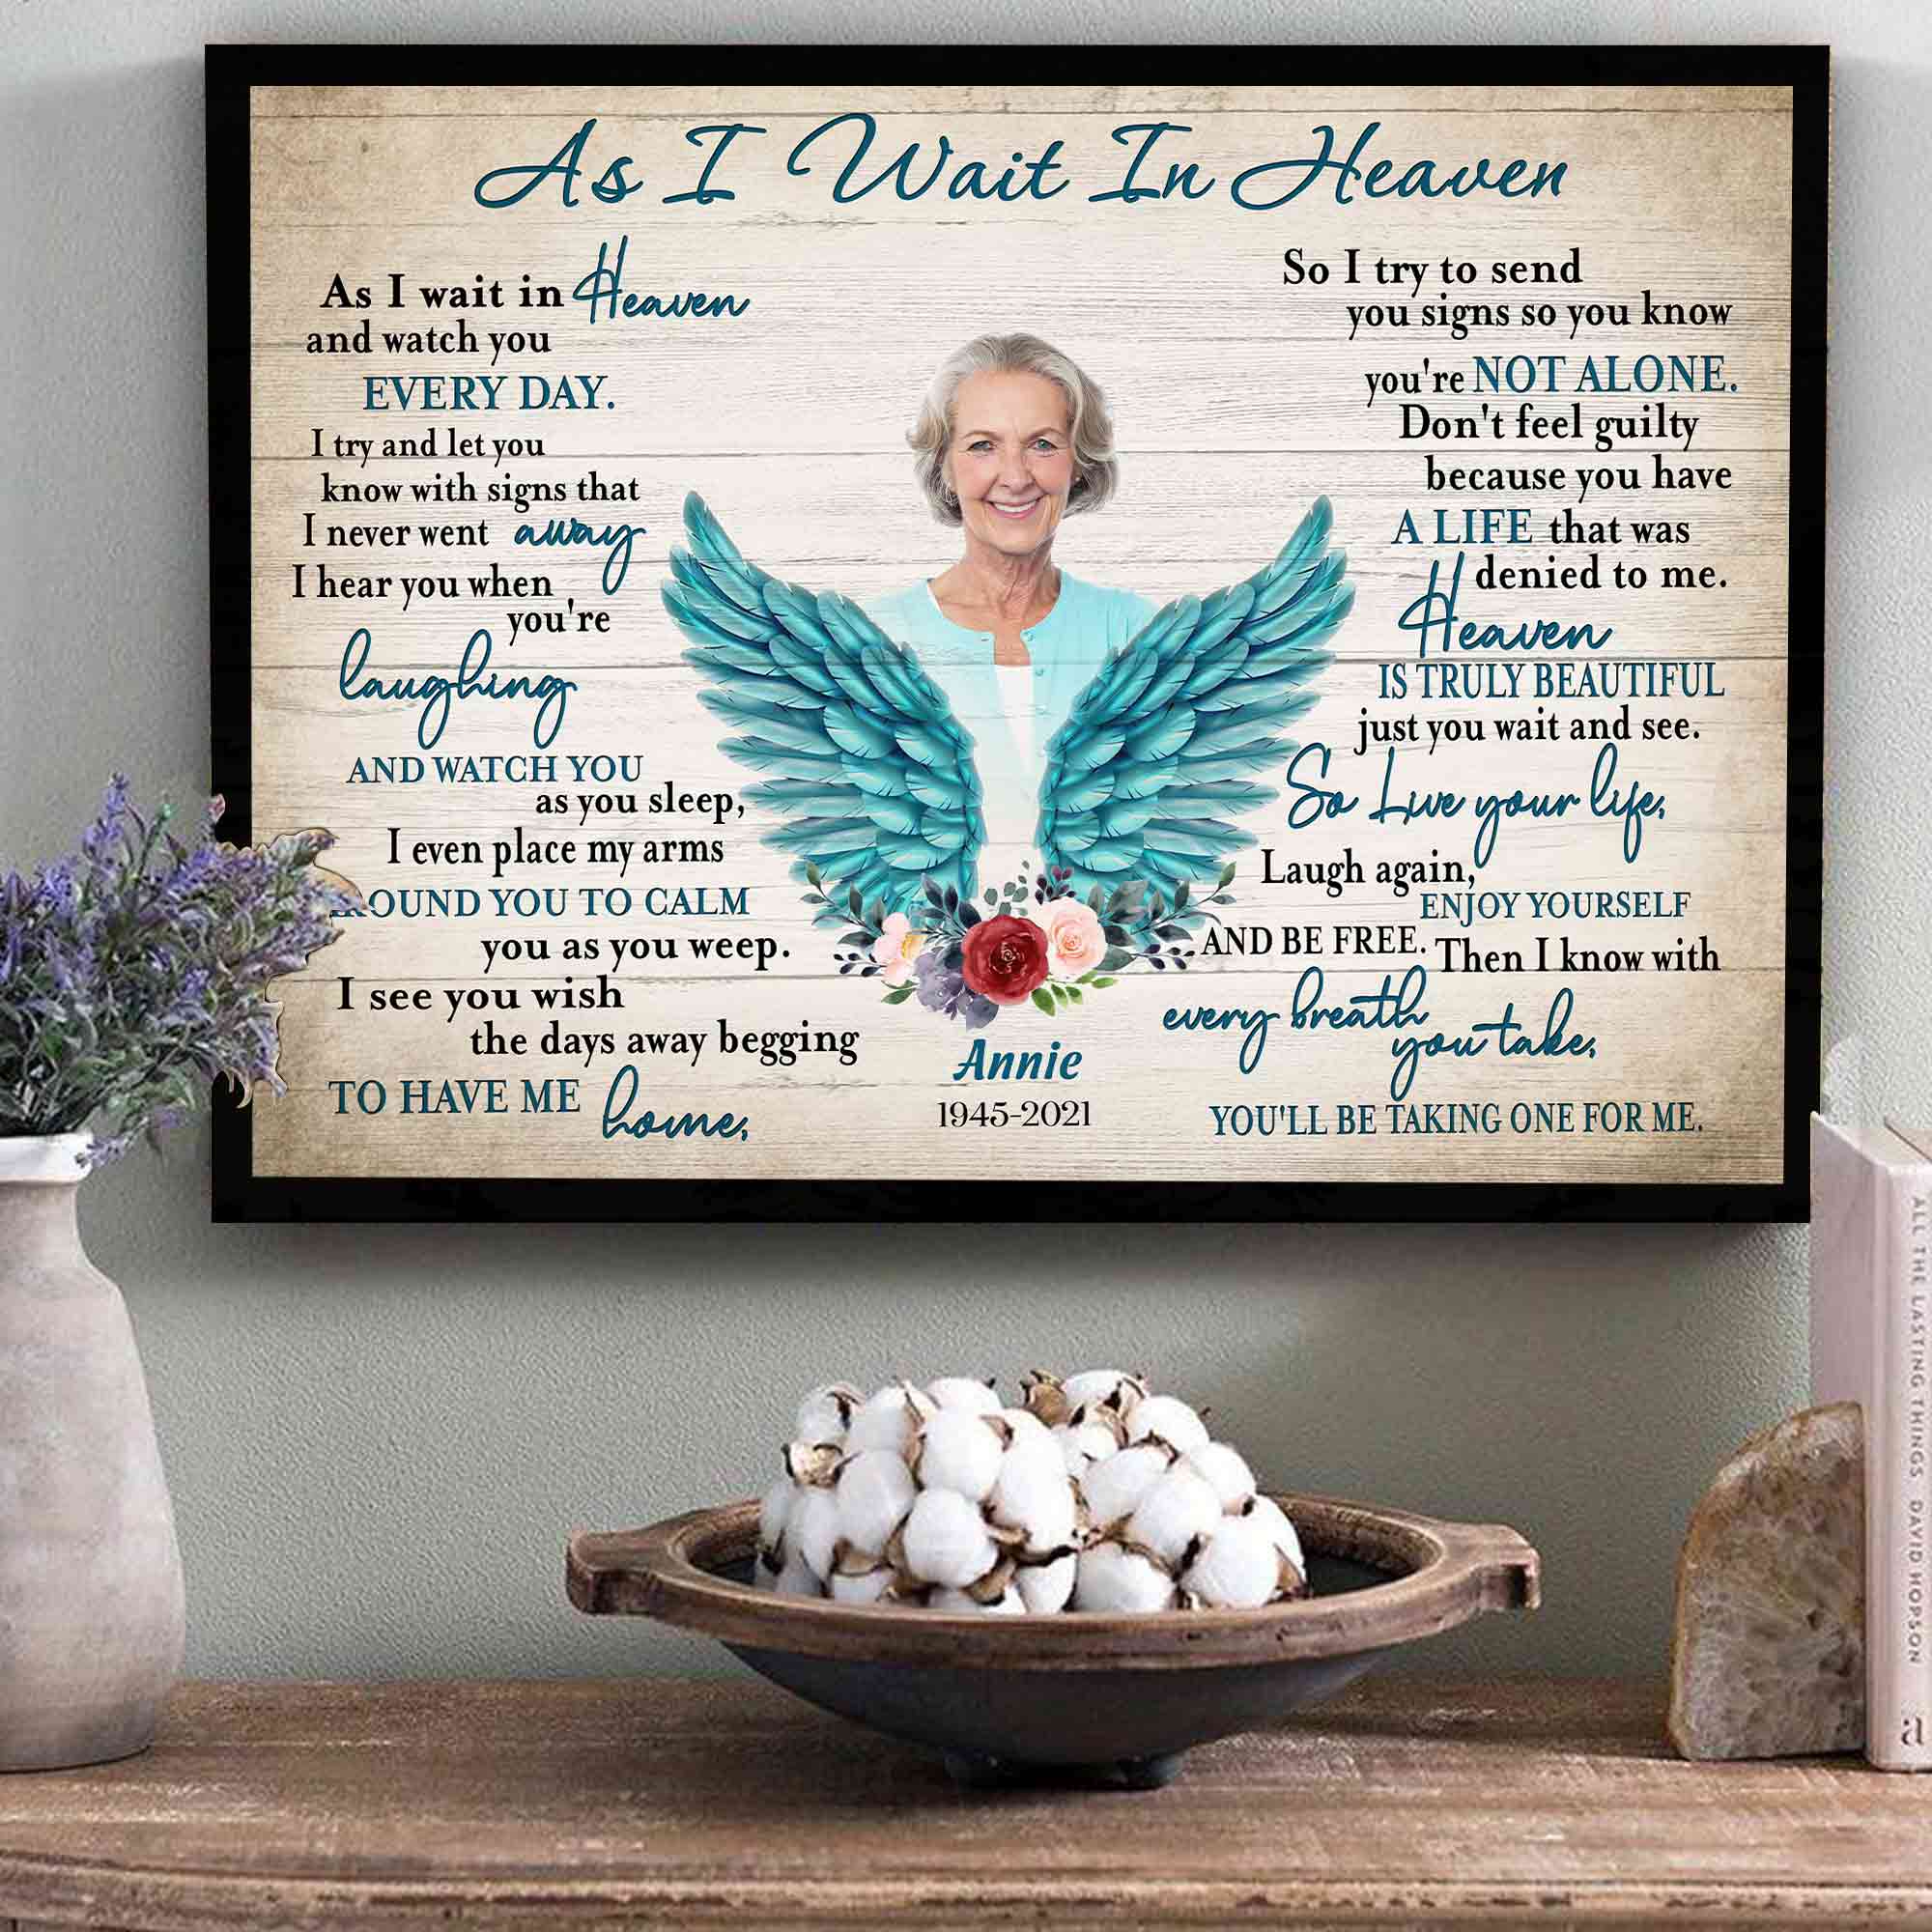 Personalize Memorial Gifts For Loss Of Mother, As I Wait In Heaven Angel Wings Canvas Prints